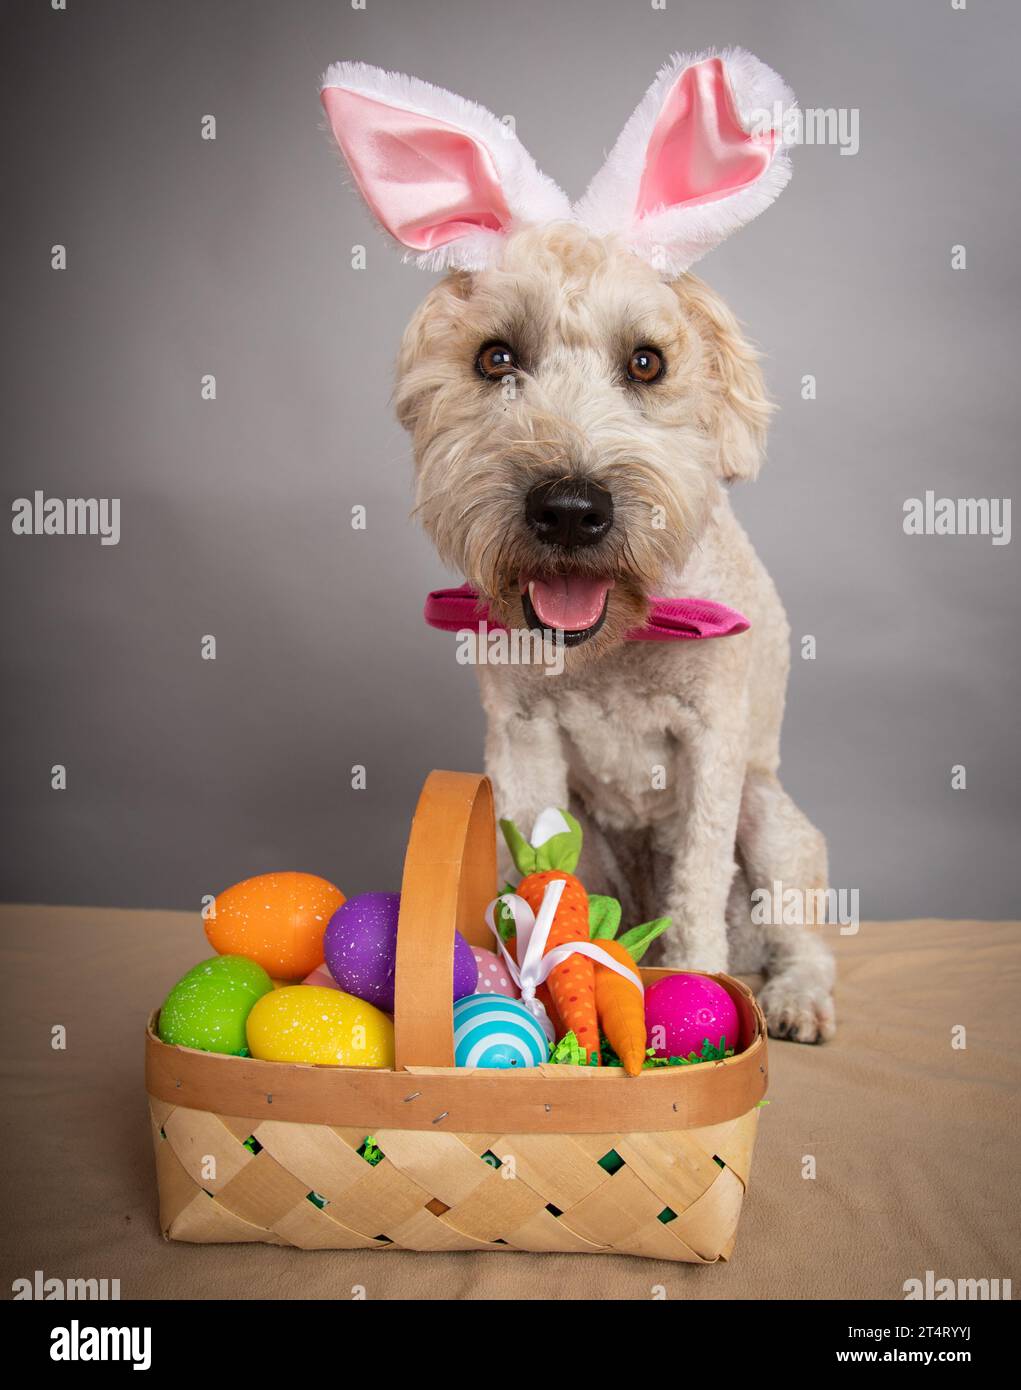 Portrait of a Wheaton Terrier wearing bunny ears and a bow tie sitting next to a basket of Easter eggs Stock Photo